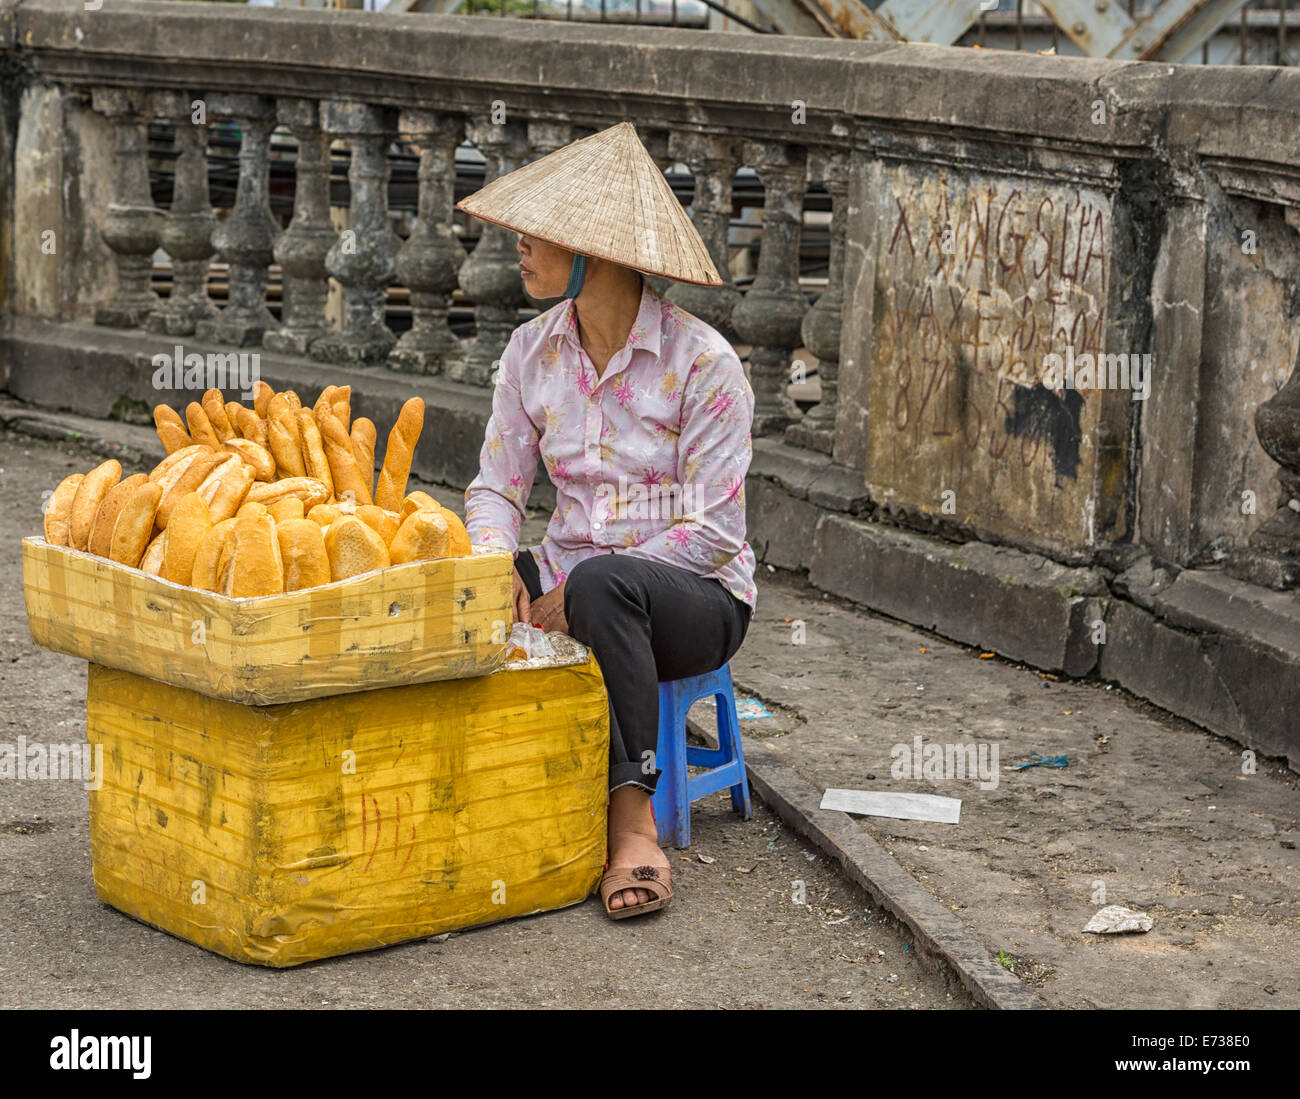 Young woman selling fresh baked bread in the street. Stock Photo